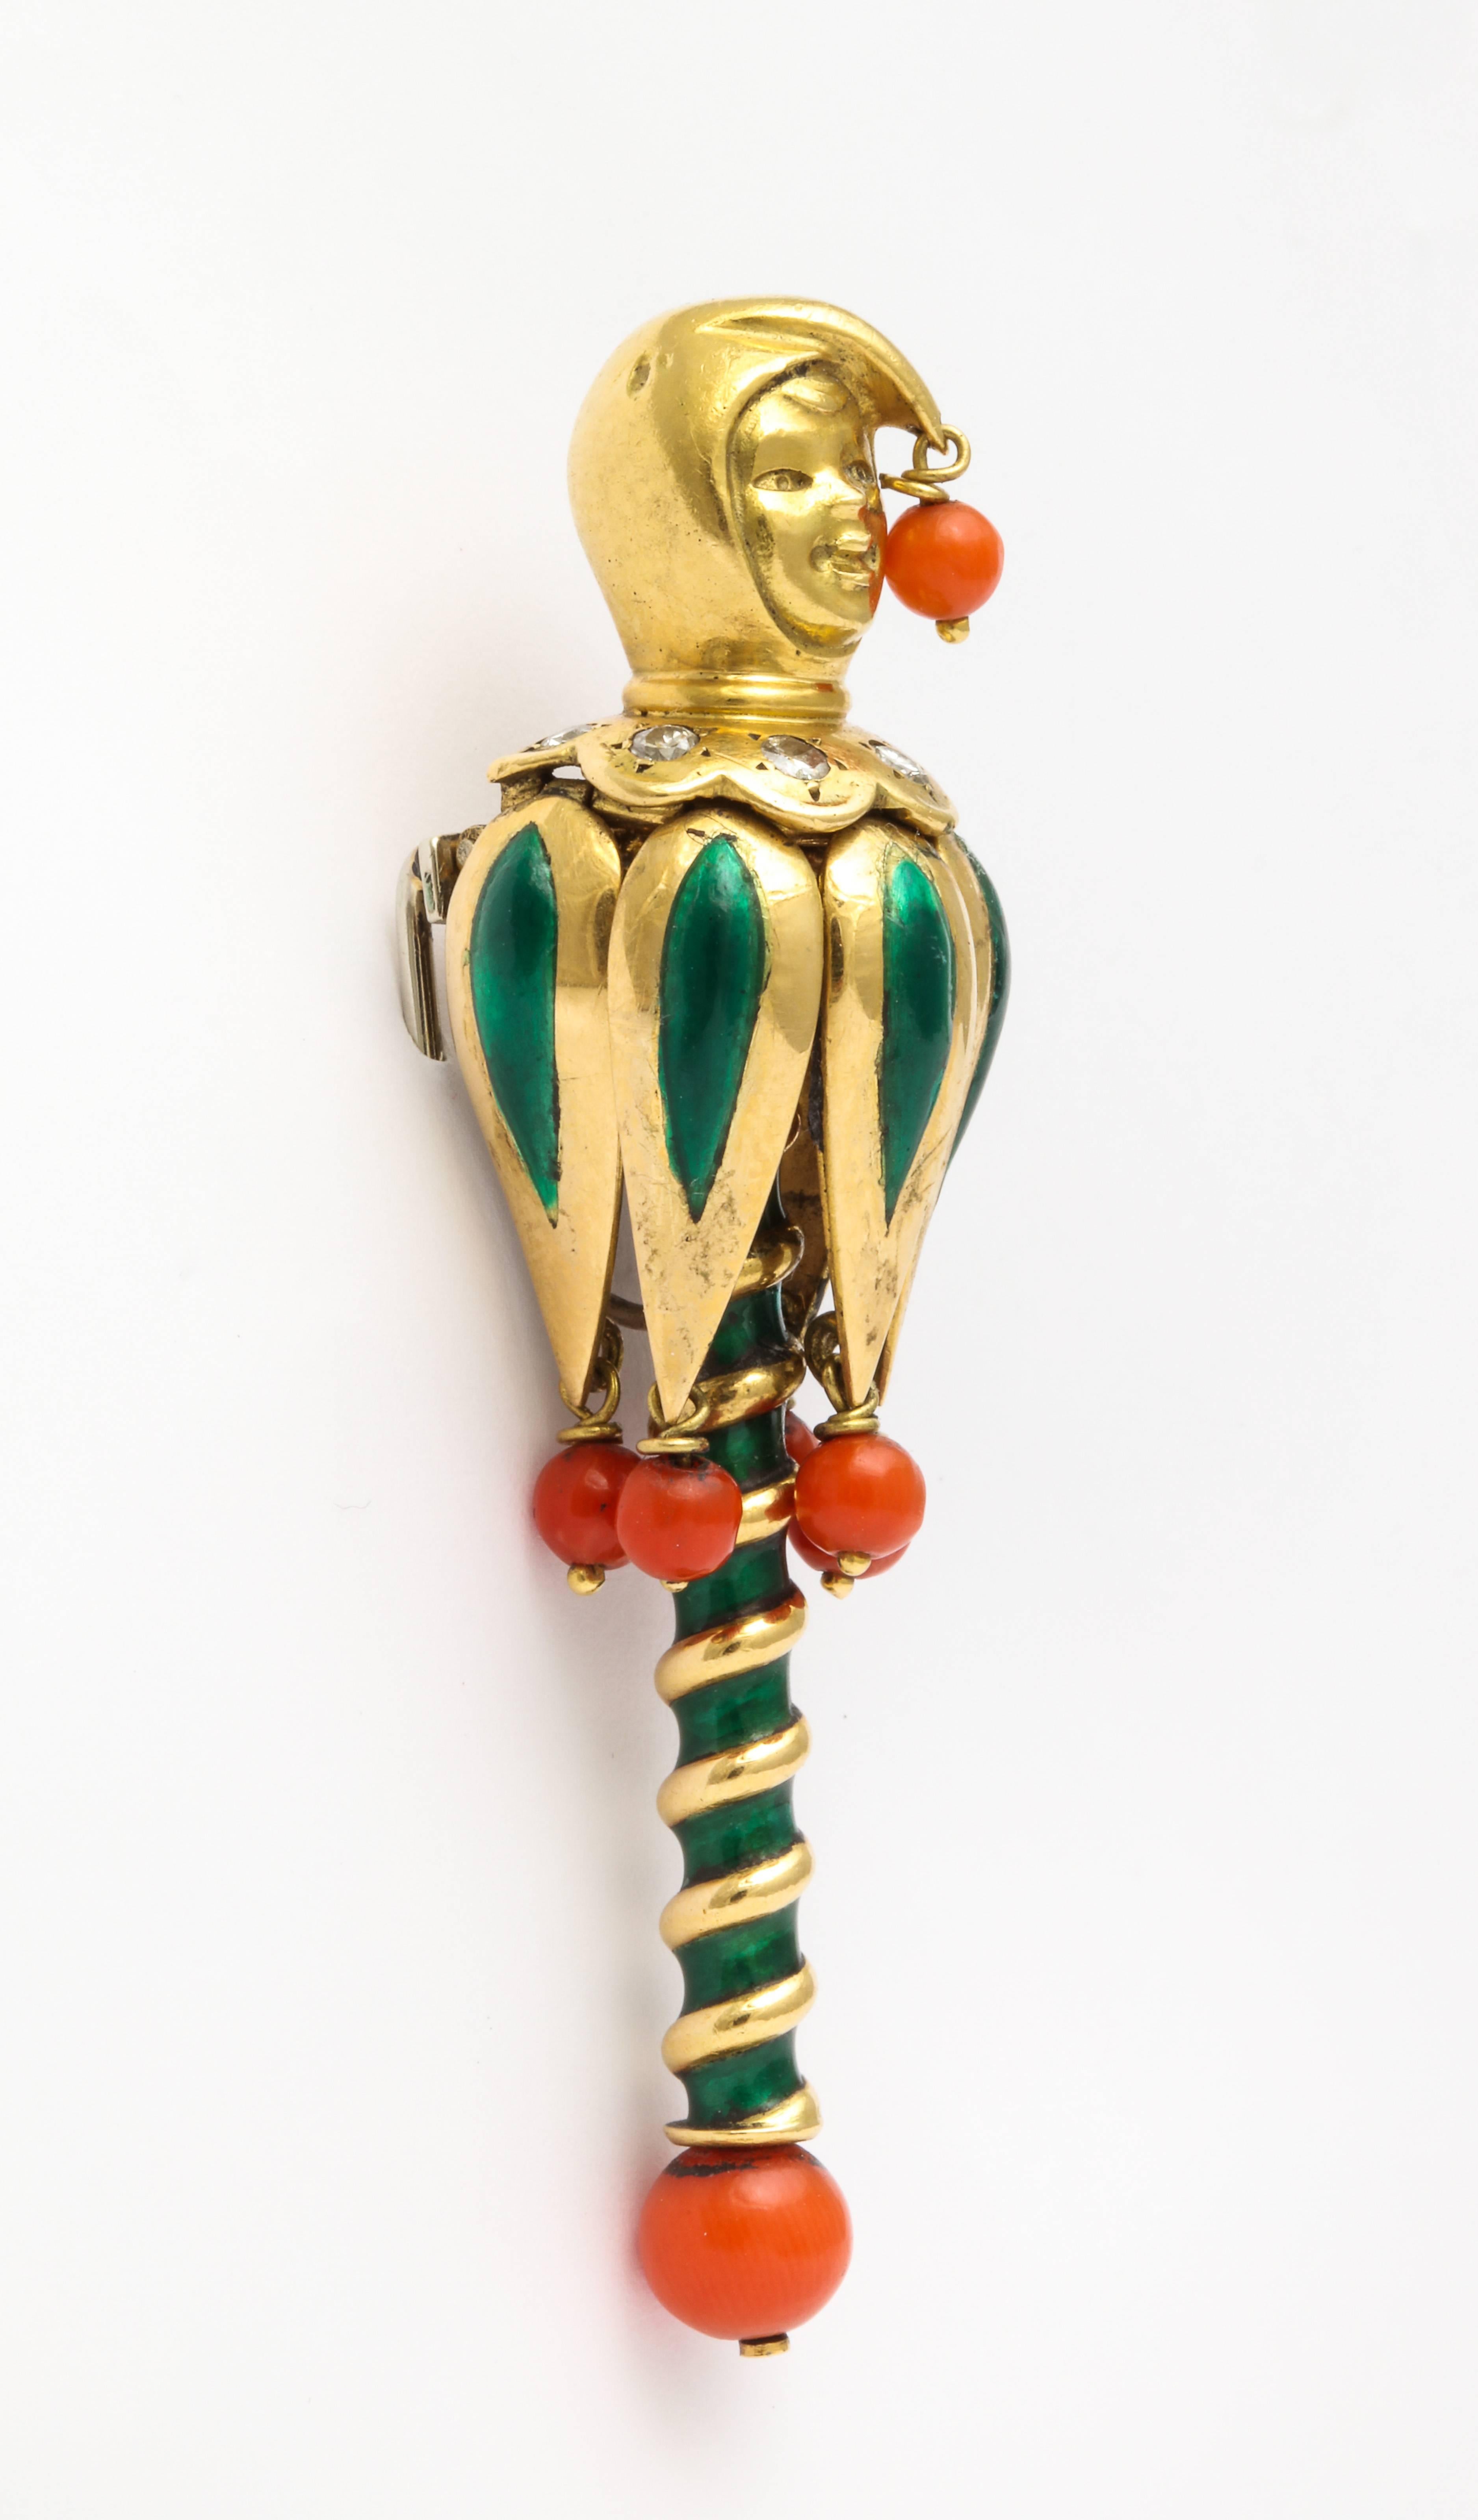 Whimsical Van Cleef and Arpels Clown Brooch

Set with green enamel, coral beads, and diamonds

Identical brooch formerly in collection of Duchess of Windsor

Signed, numbered and stamped

Provenance;

Depicted in full page spread in the 